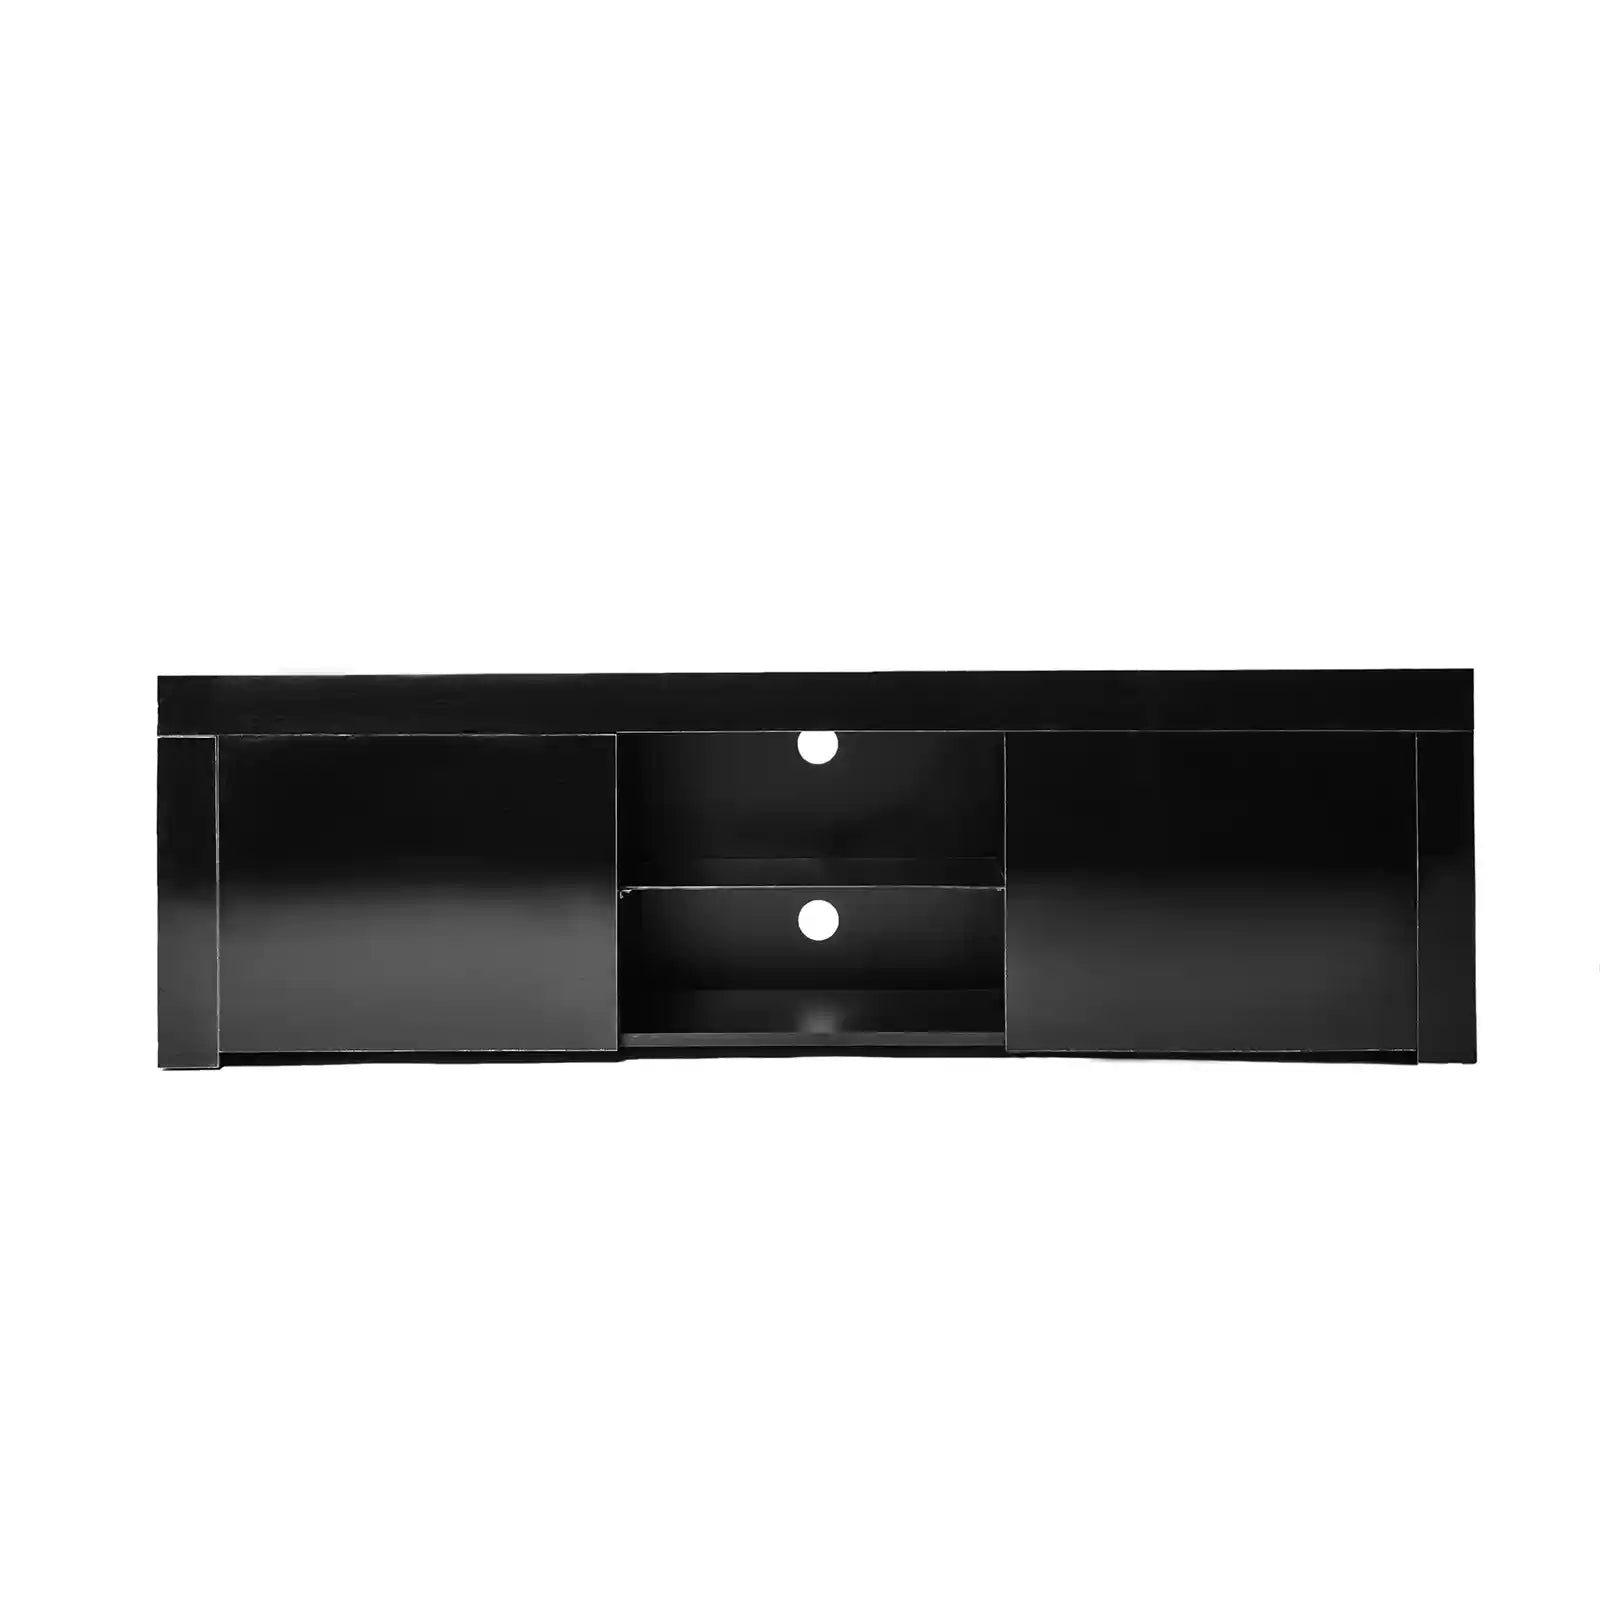 TV Stand with Lights, Black High Glossy TV Cabinet with Storage Drawer and Shelf , Modern Entertainment Center